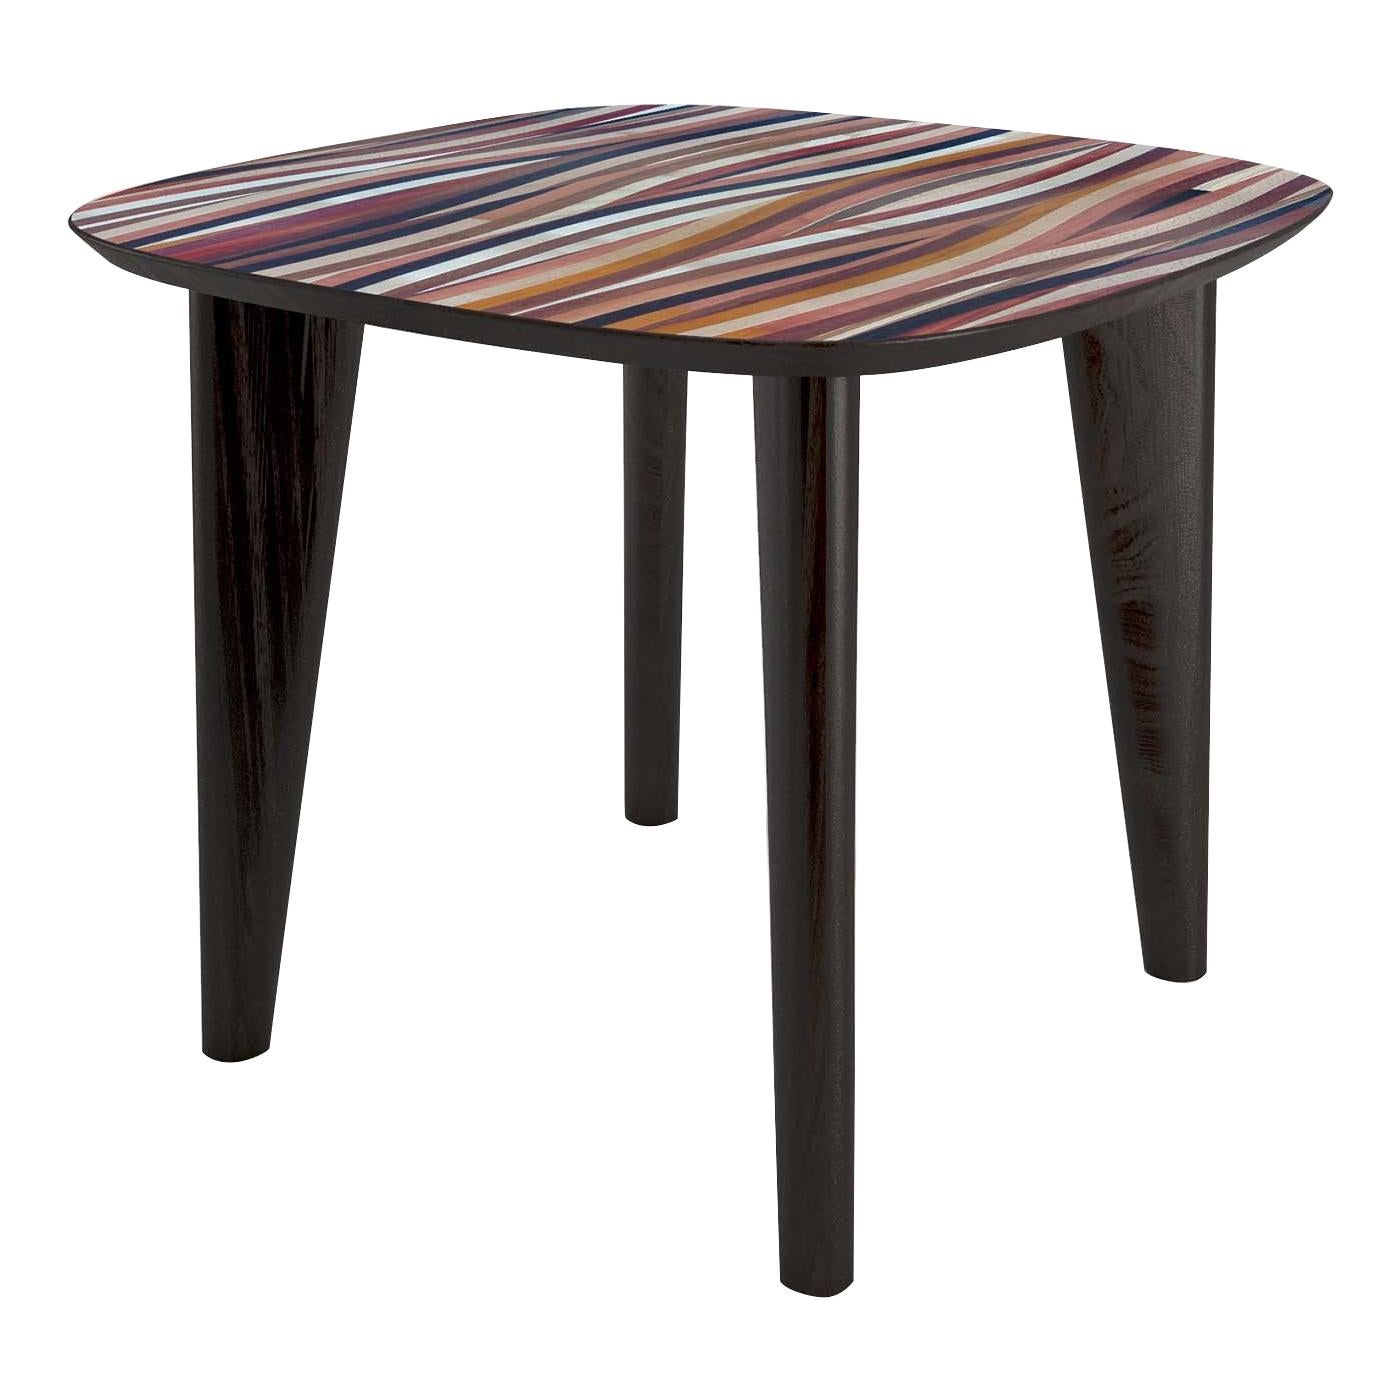 Multiessenza Square Table by Gabriele E. M. D'Angelo